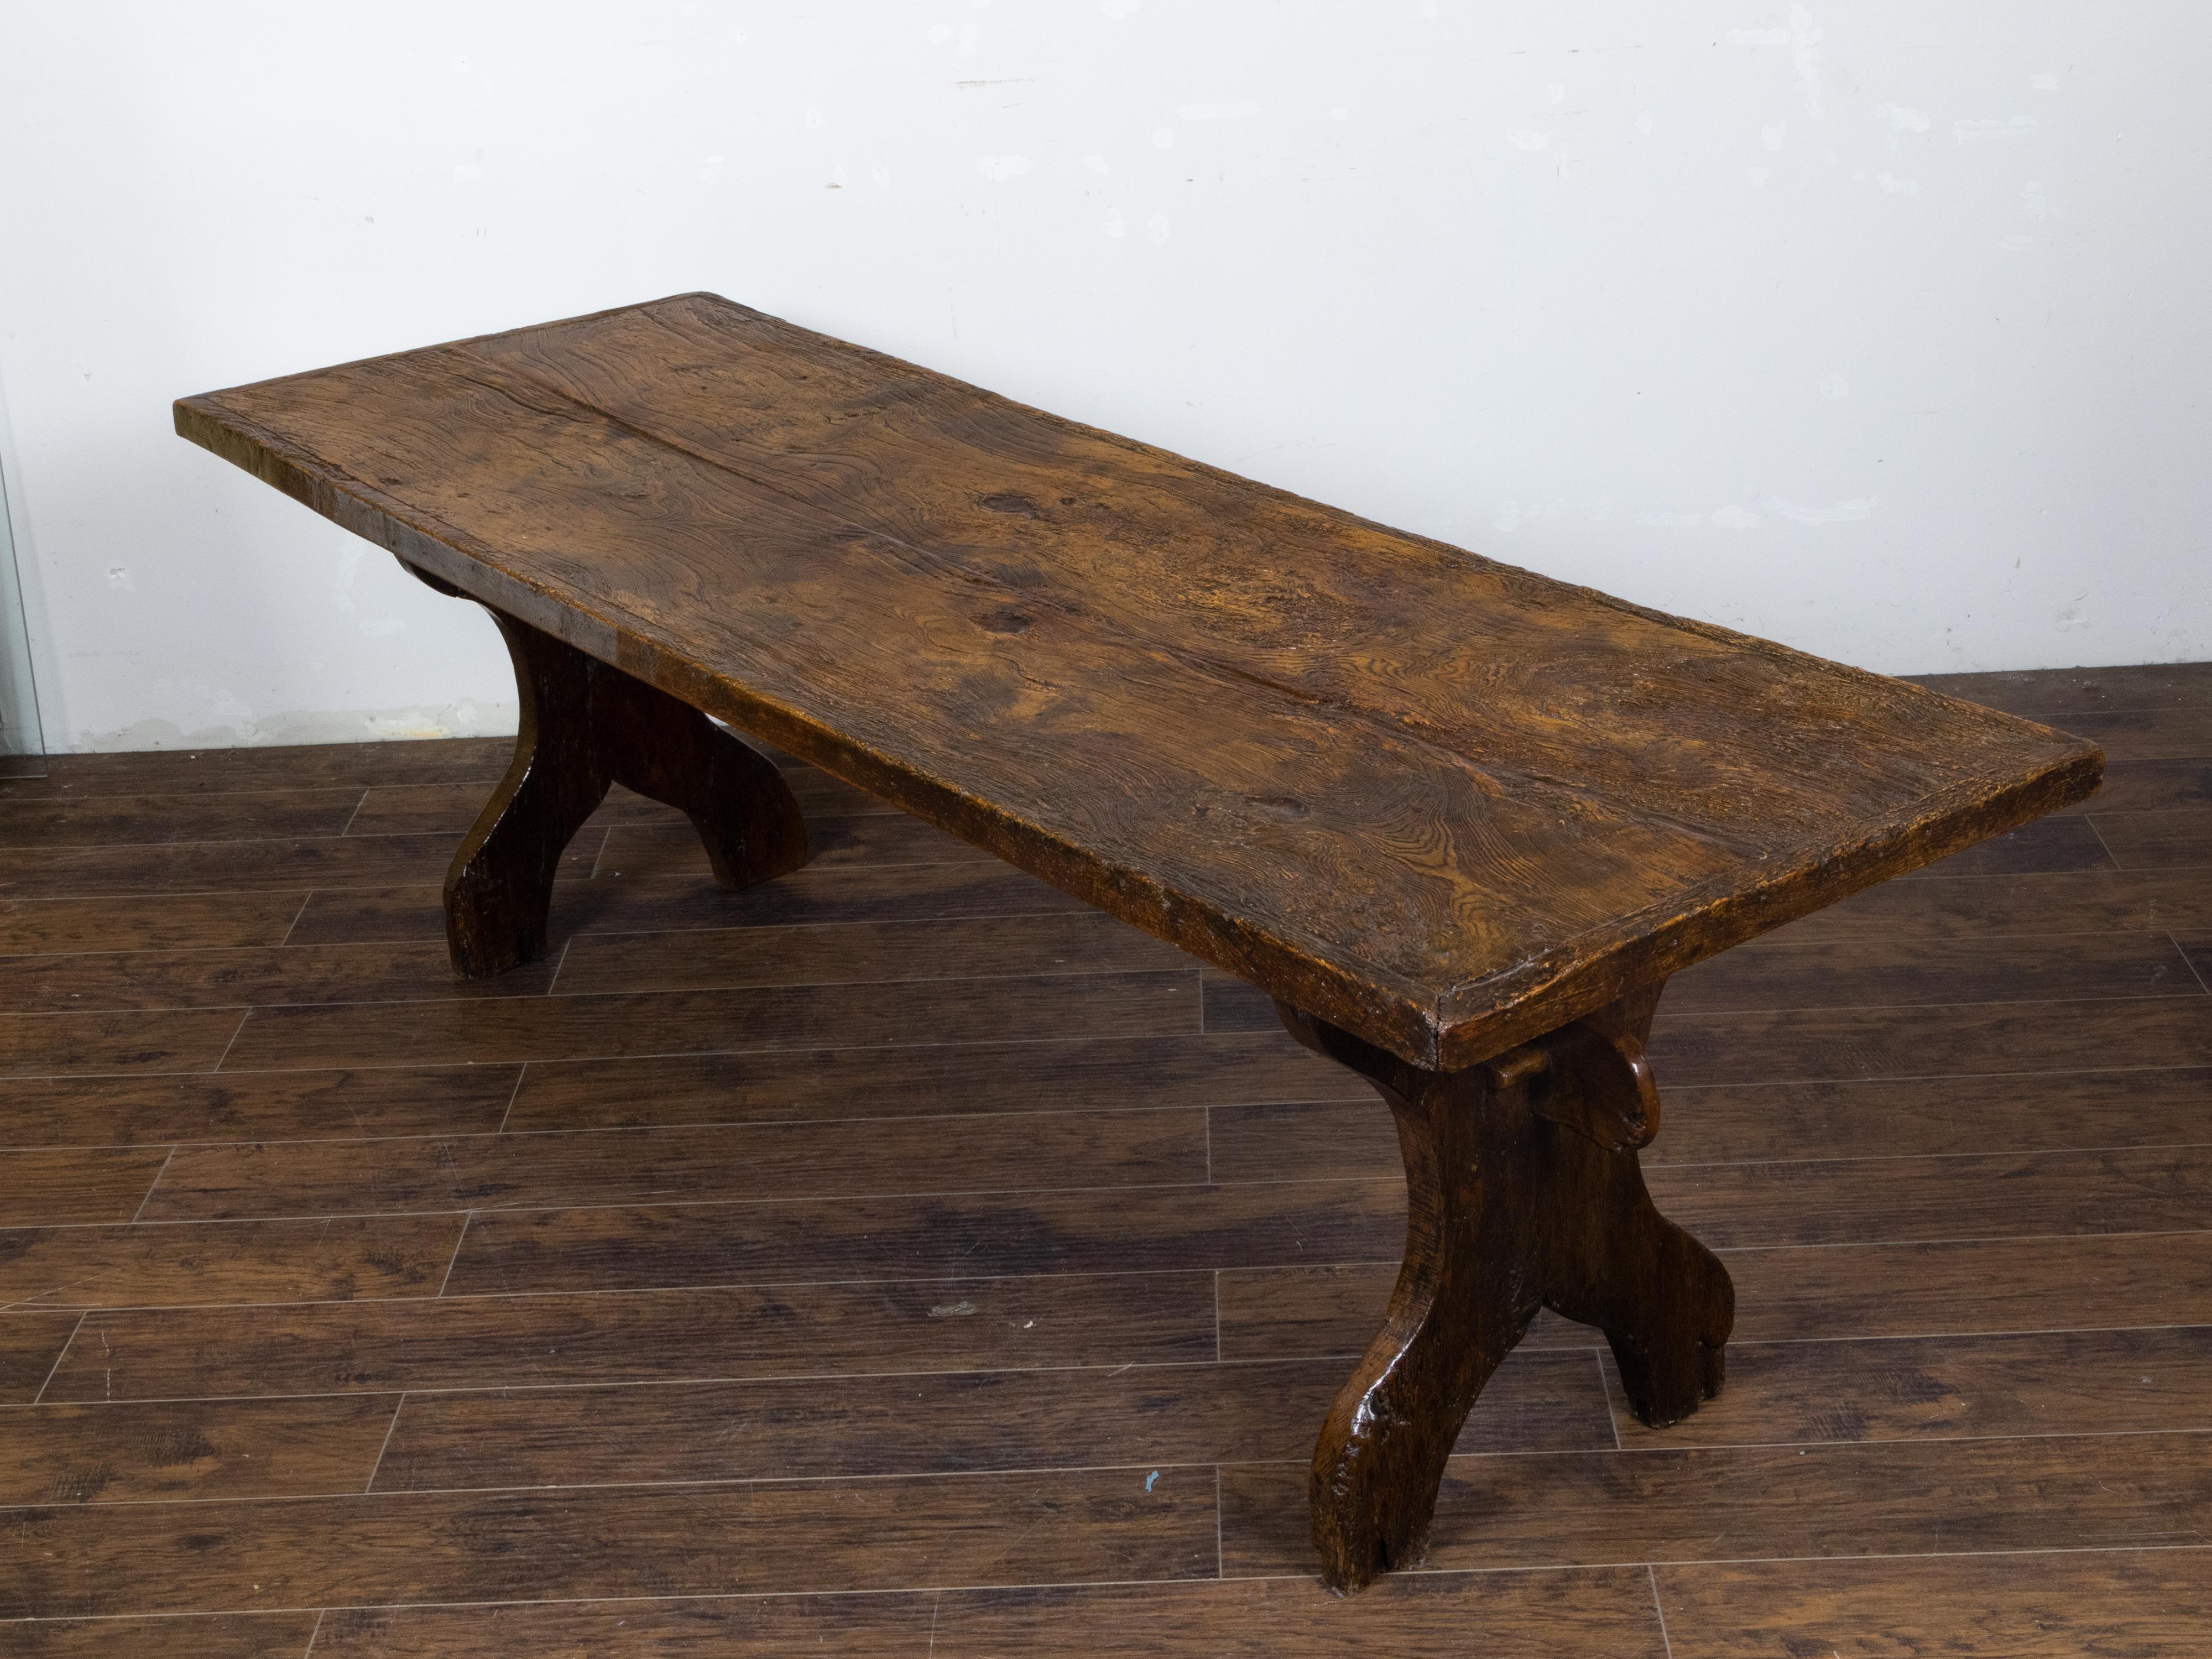 An Italian walnut farm table circa 1800 with carved legs, plain cross stretcher and nicely aged patina. This Italian walnut farm table, circa 1800, exudes a sense of rustic elegance and time-honored craftsmanship. With its beautifully aged patina